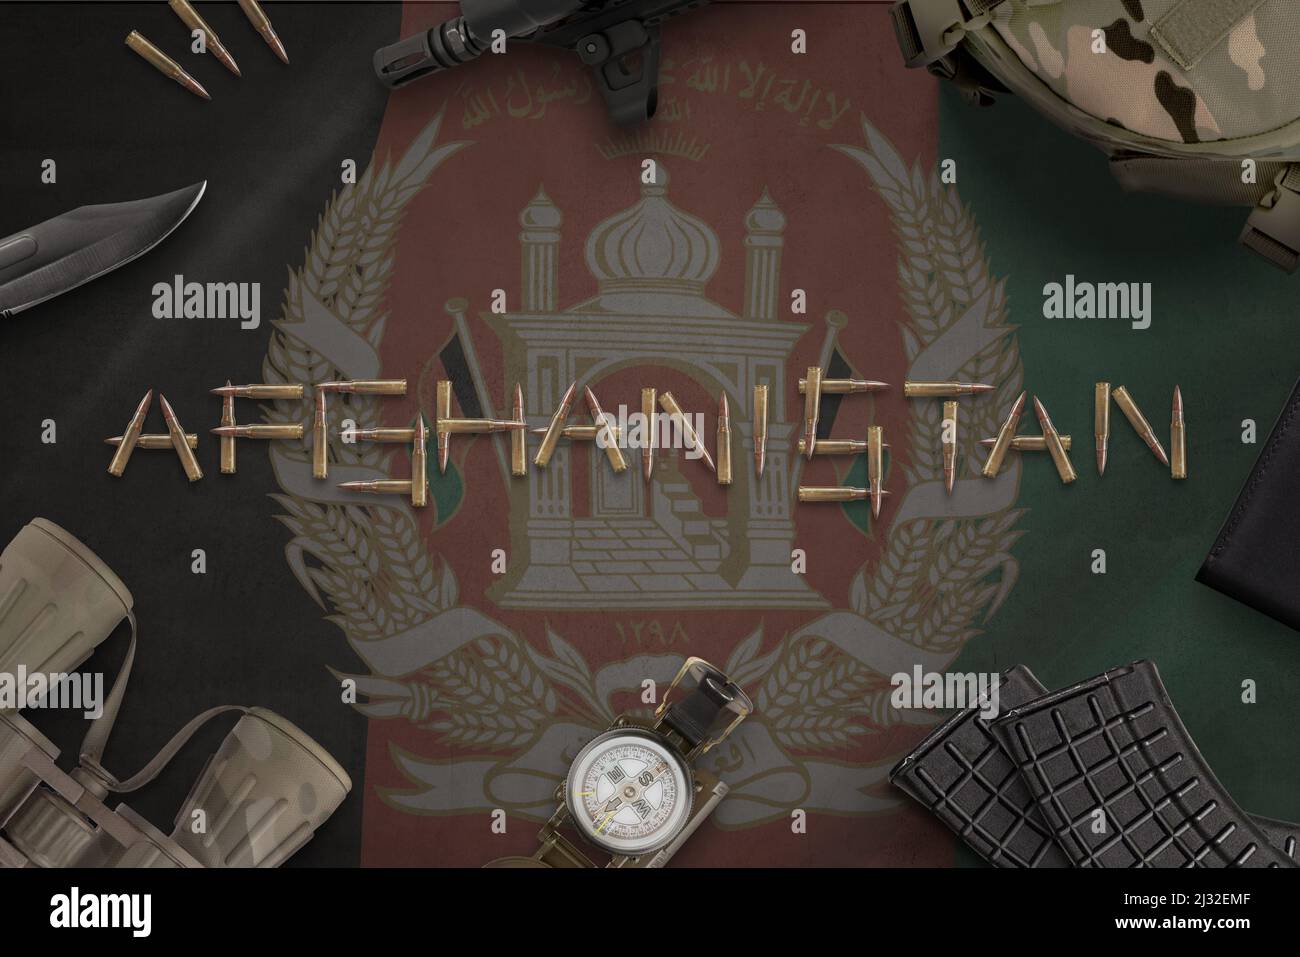 Afghanistan inscribed with bullets on the flag surrounded by military equipment. Taliban conflict concept Stock Photo